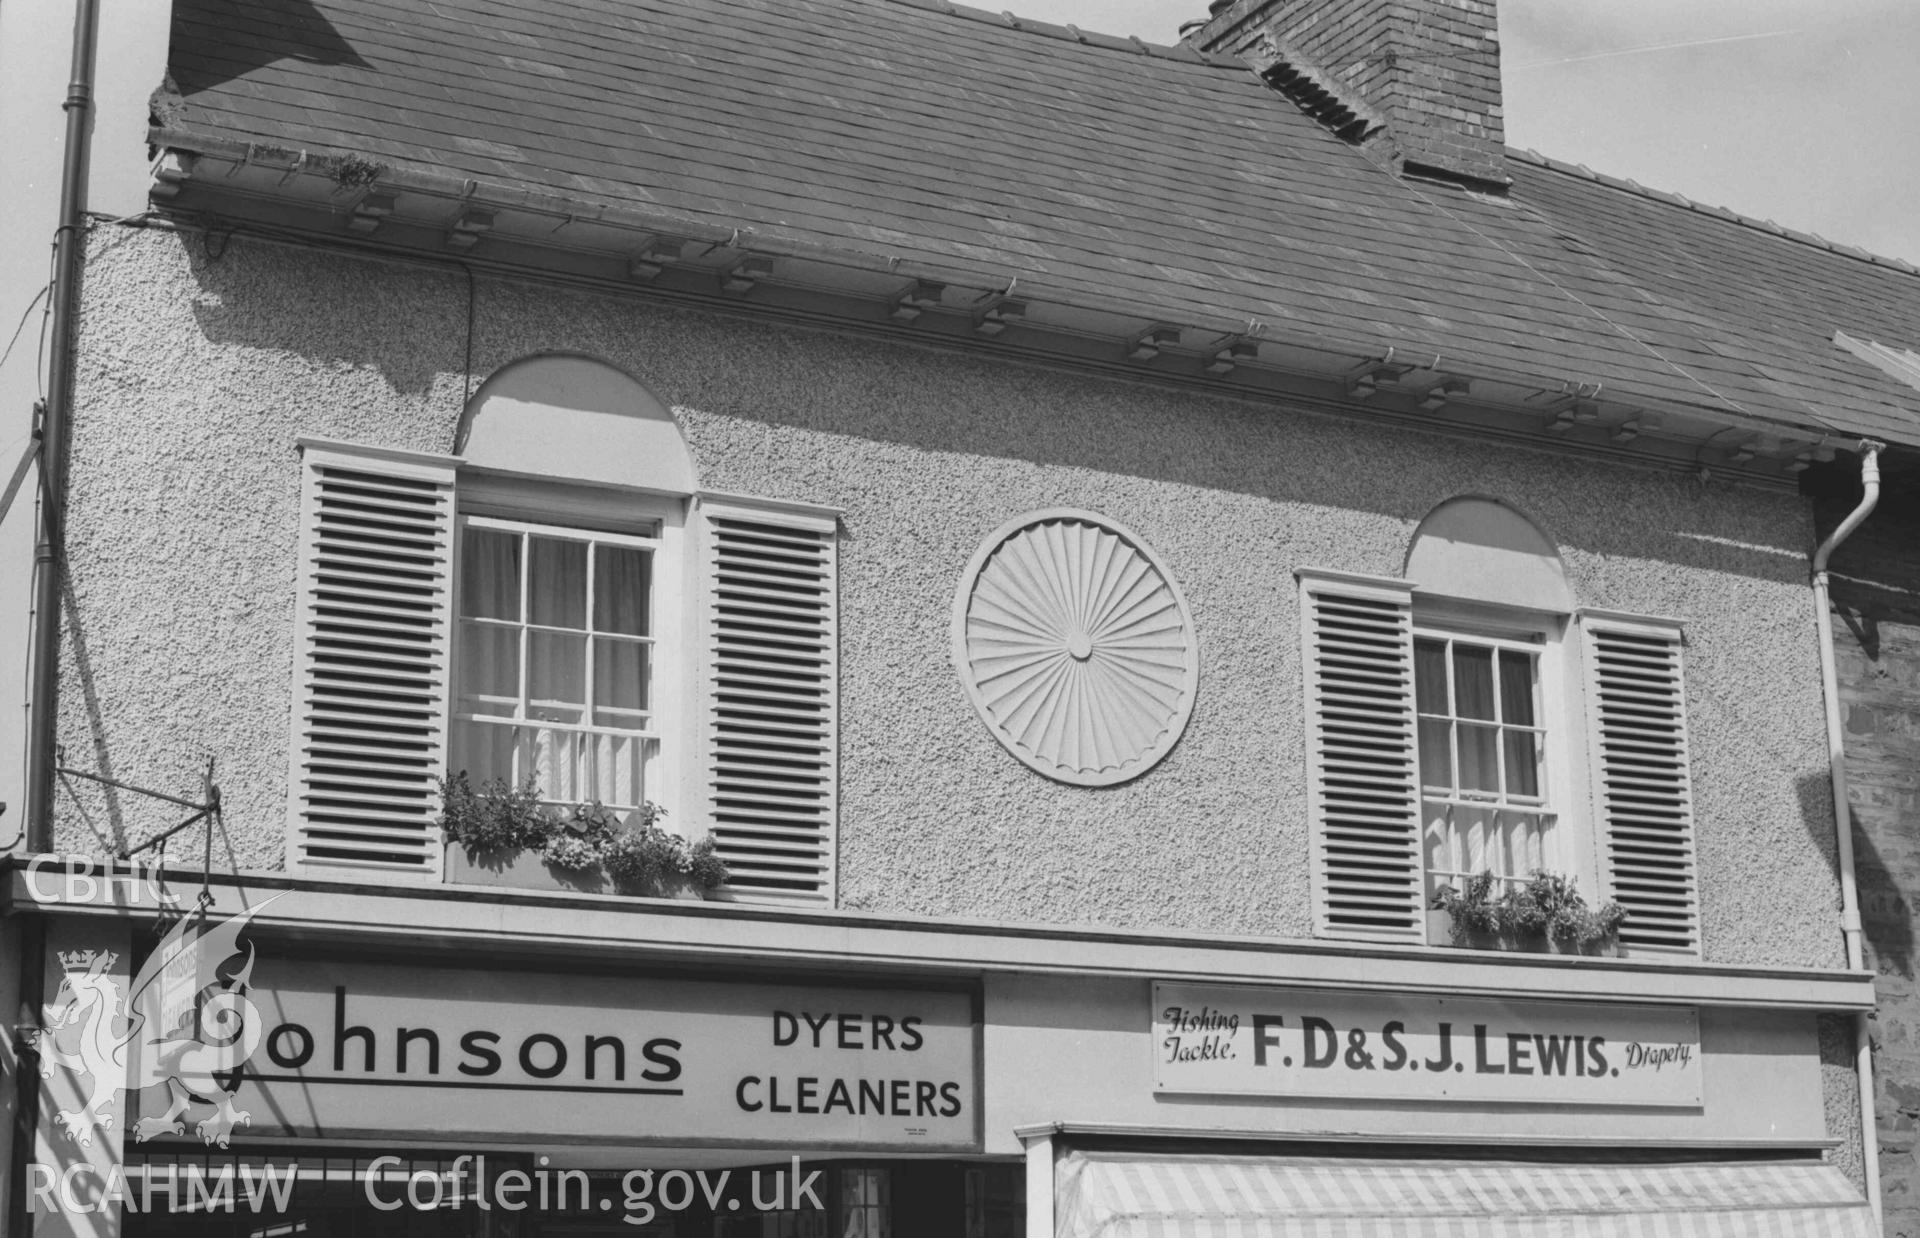 Digital copy of a black and white negative showing F. D. S. Lewis's fishing tackle shop and Johnsons Dryers Cleaners on the west side of Cardigan High Street. Photographed by Arthur Chater on 30 August 1968. Looking west from Grid Reference SN 178 463.